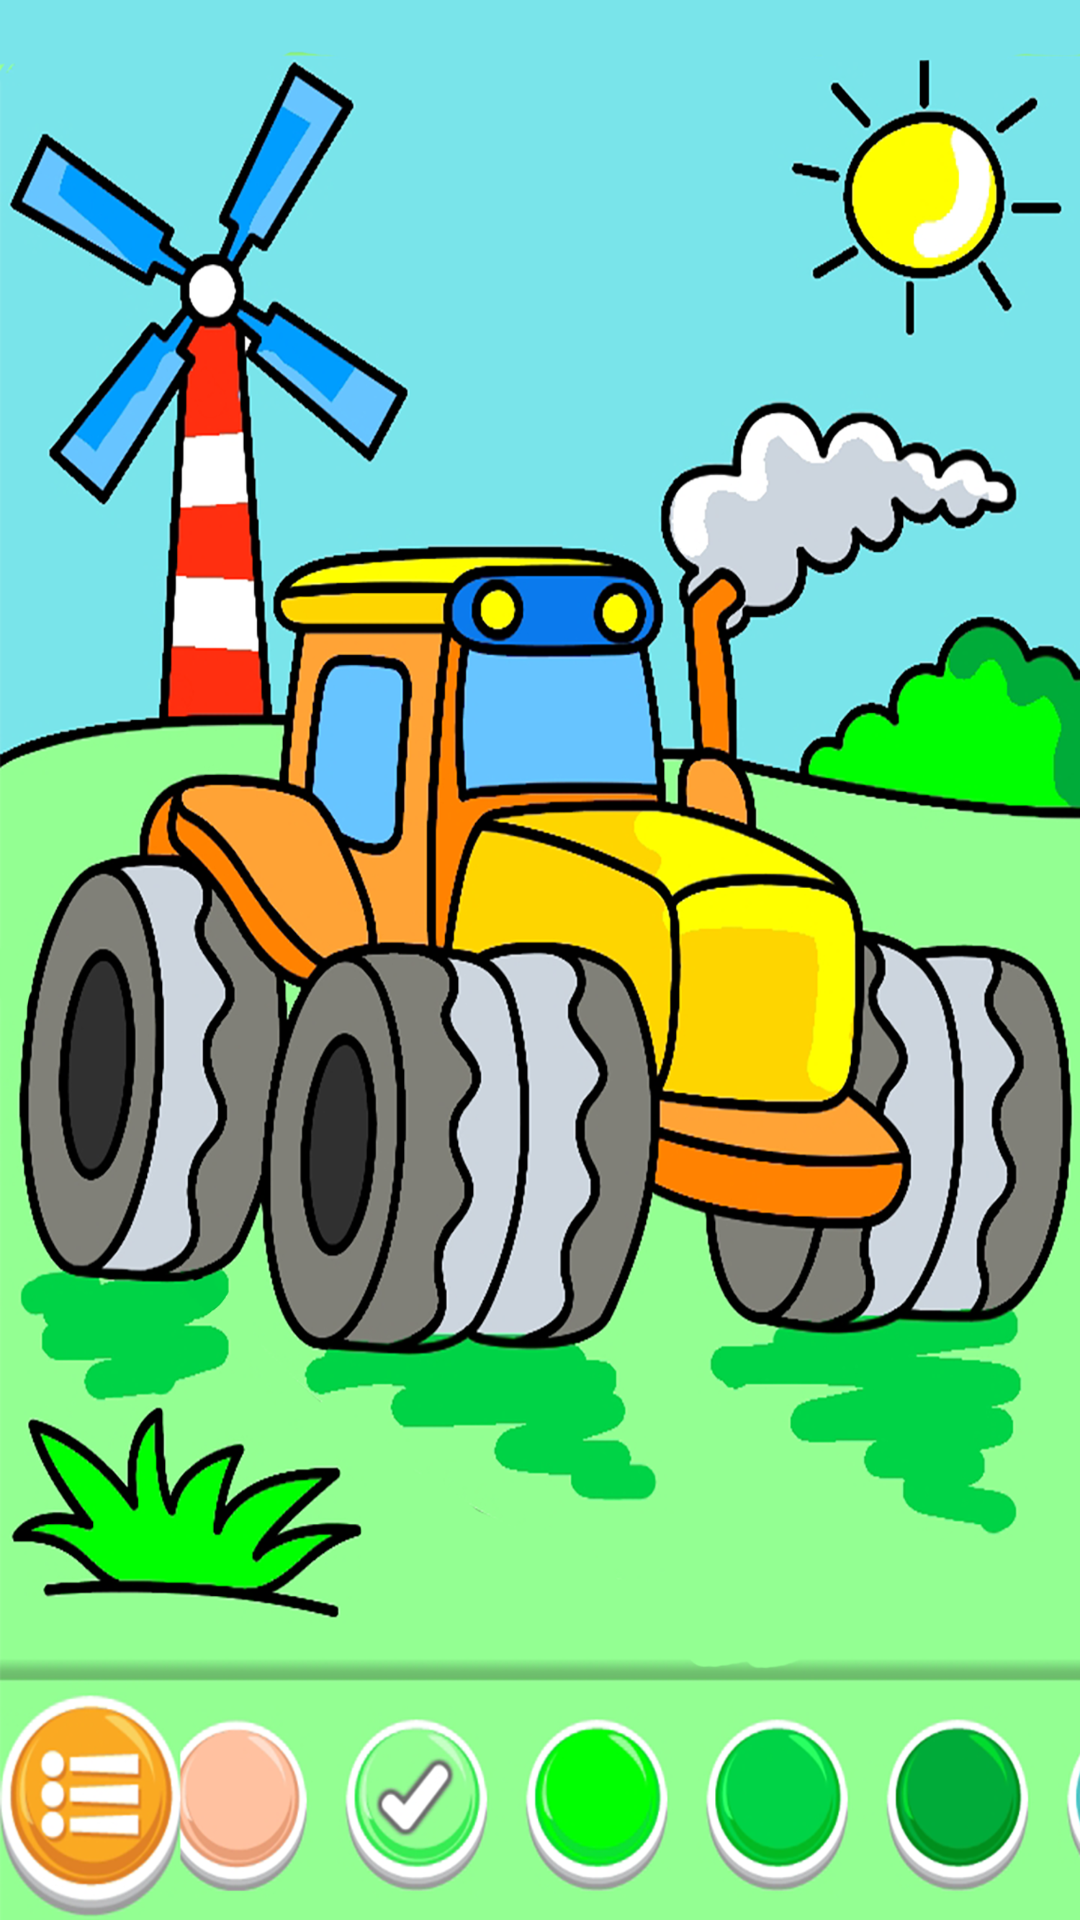 Cars Coloring Book for Kids - Doodle, Paint & Draw 게임 스크린 샷